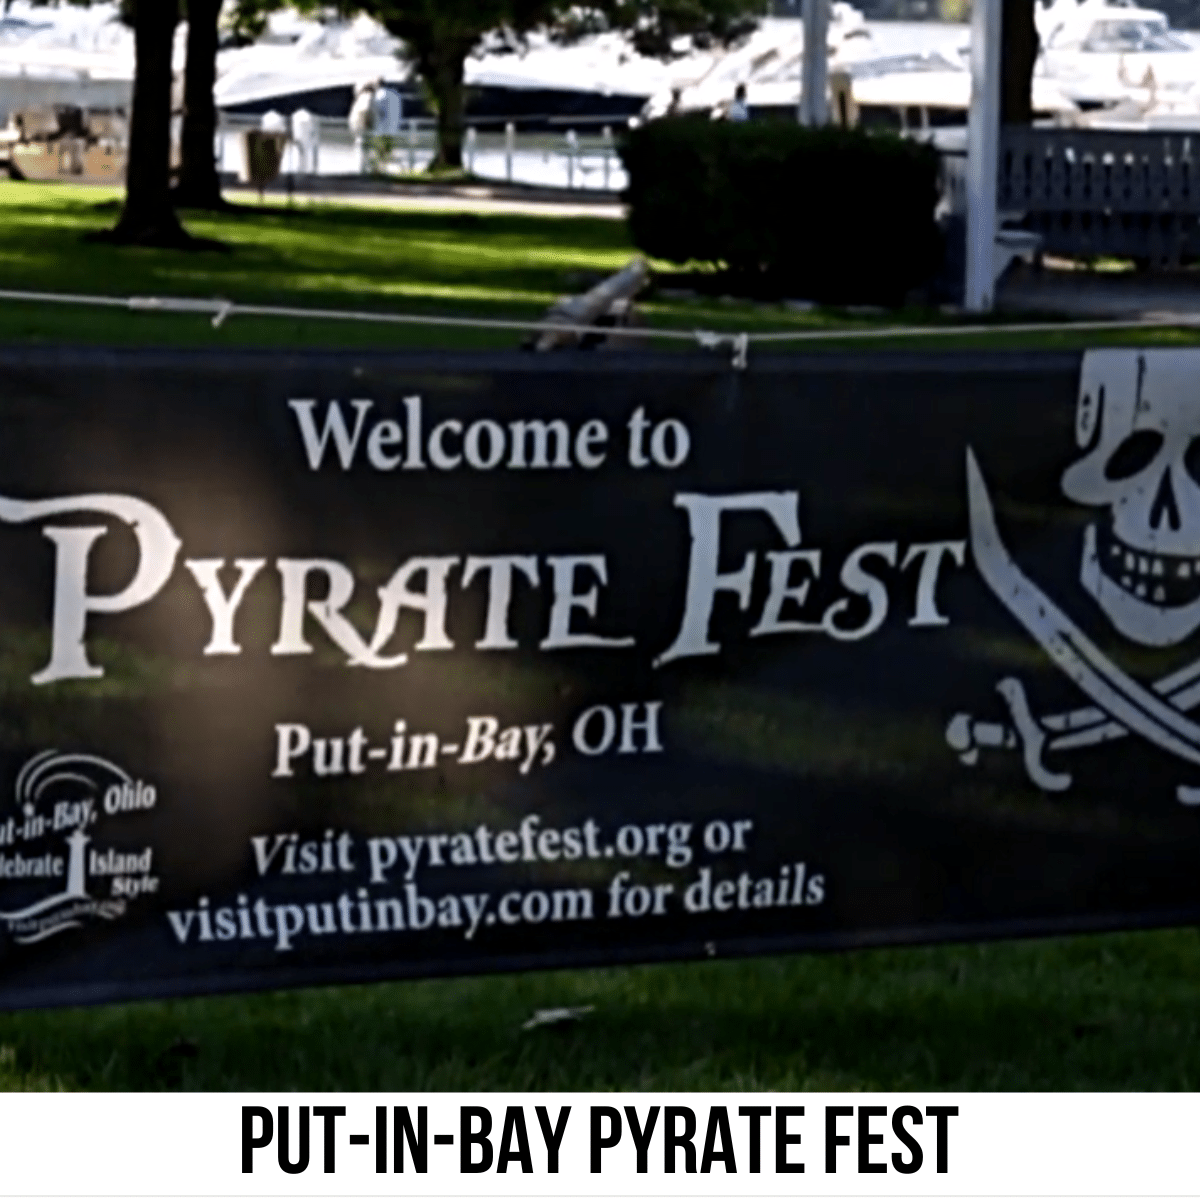 A square image of a photo of a black banner sign with white lettering that says Welcome to Pyrate Fest Put-in-Bay, OH Visit pyratefest.org or visitputinbay.com for details. A white strip across the bottom has text Put-In-Bay Pyrate Fest..